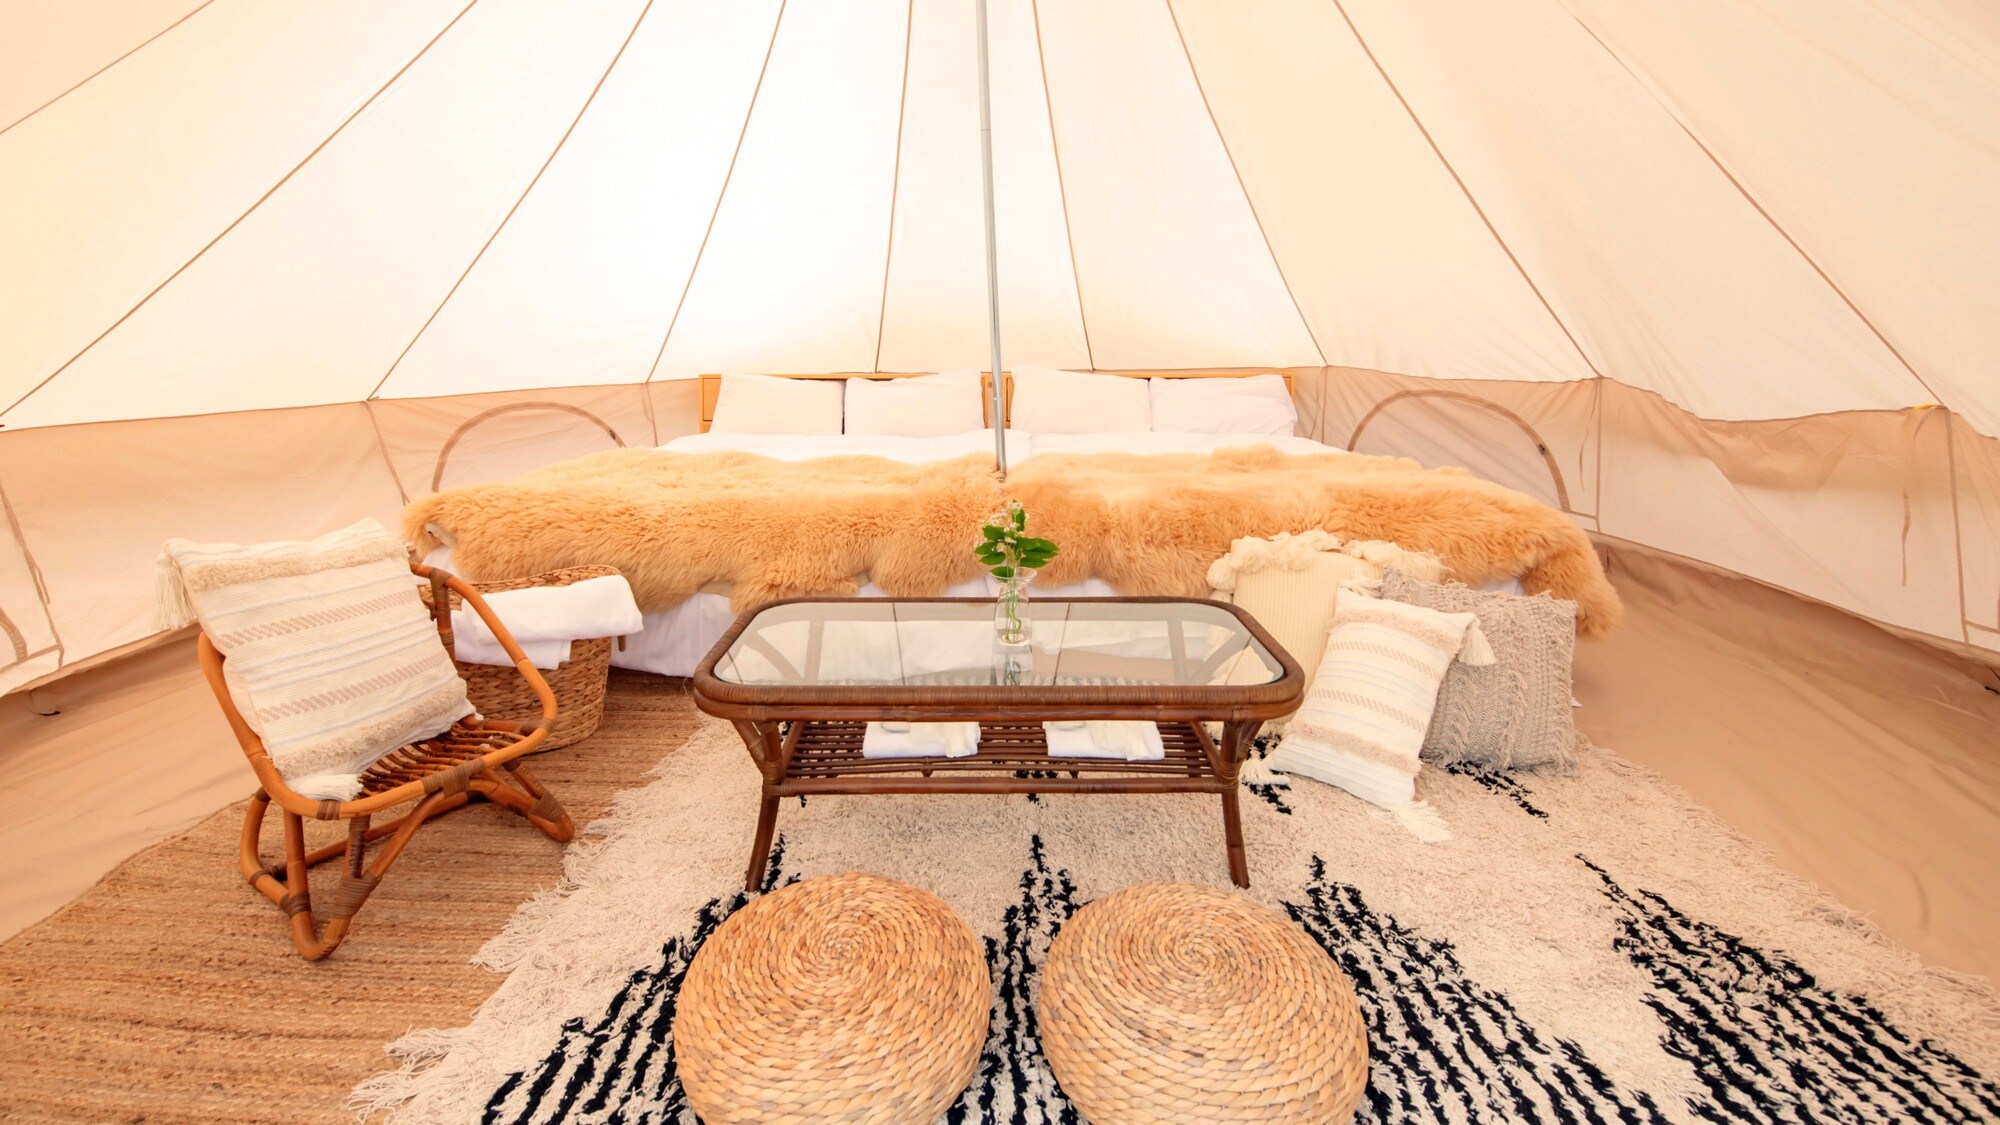 Feel free to experience glamping in a tent unified in a natural and calm space